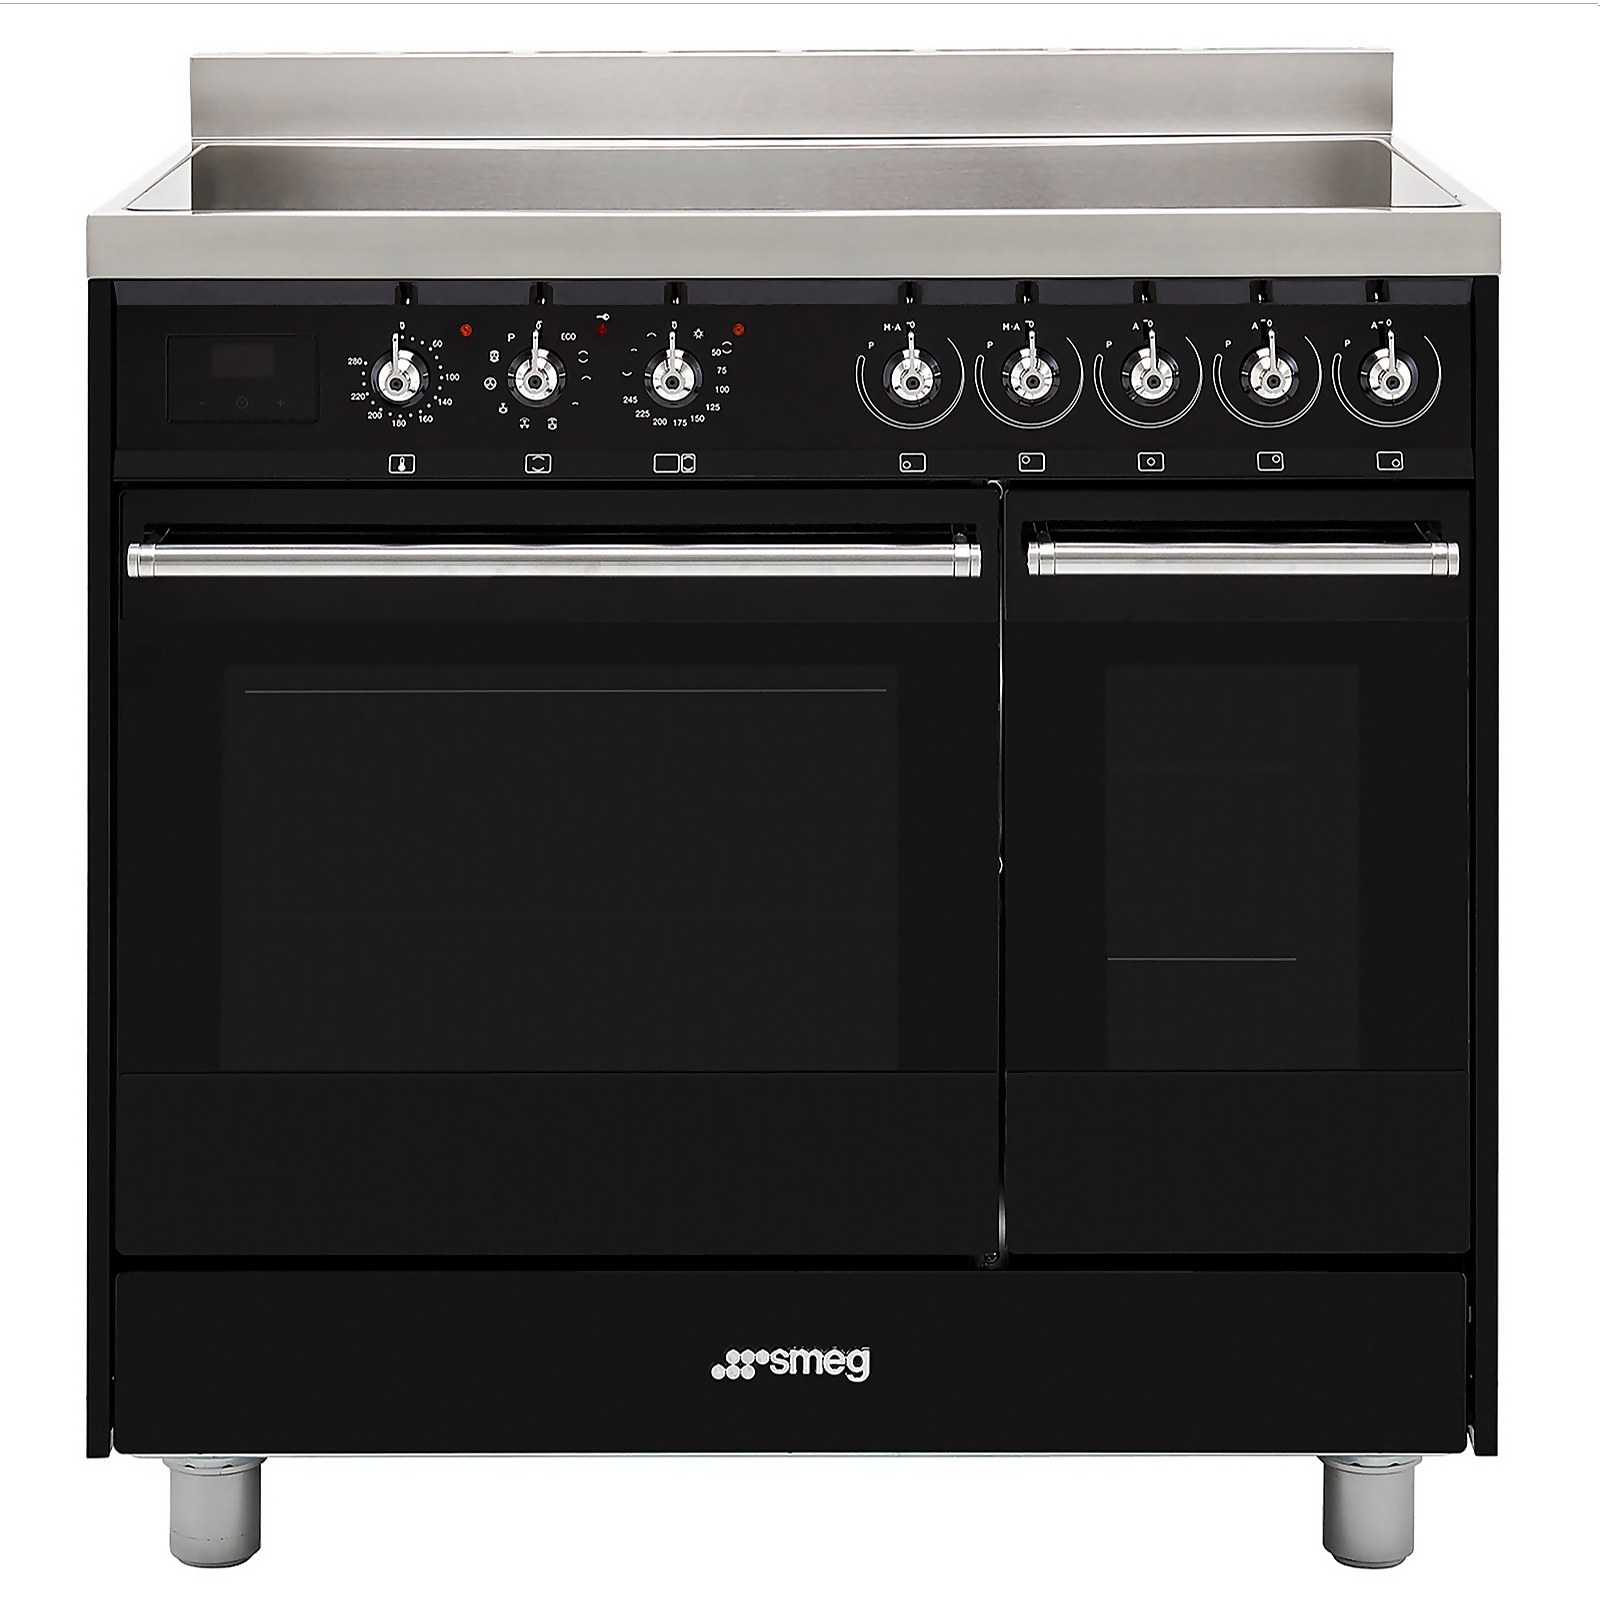 Smeg Classic C92IPBL9-1 Electric Range Cooker with Induction Hob - Black